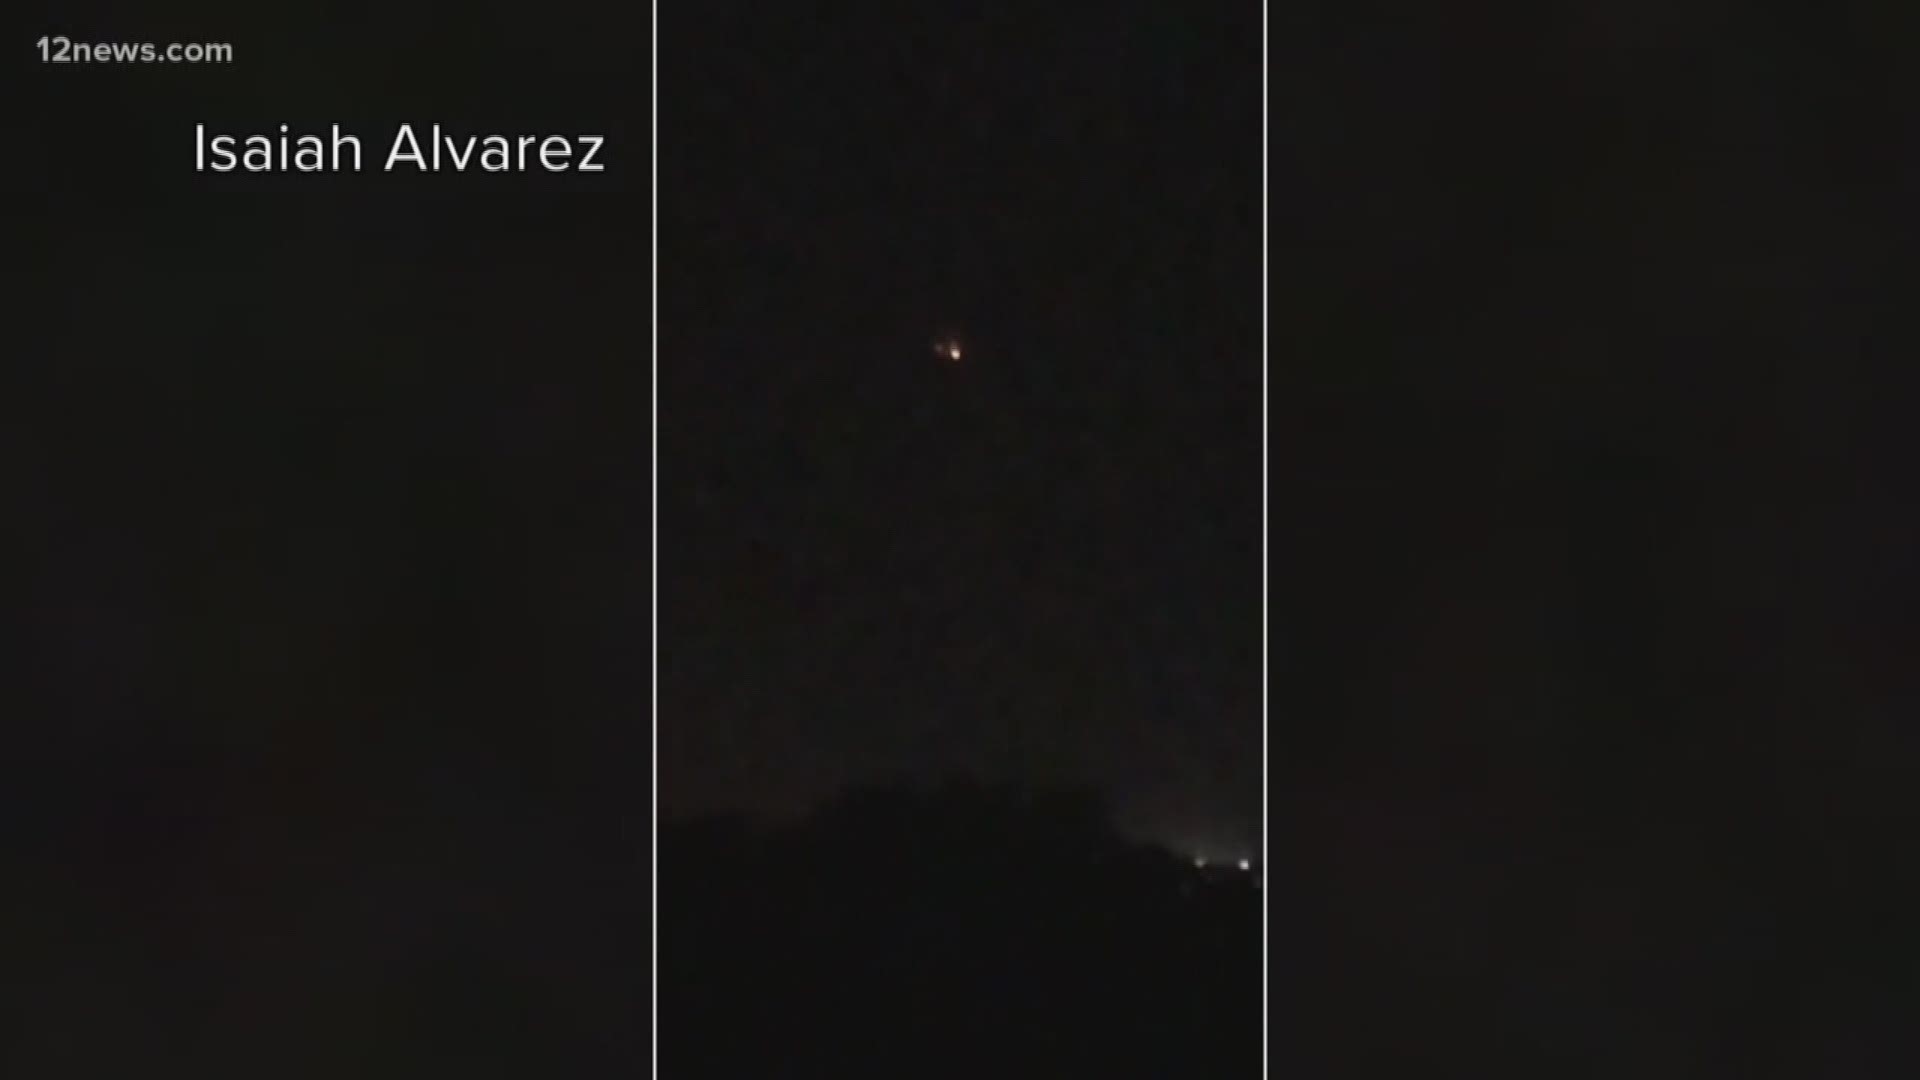 What's that in the Tucson sky? We aren't sure, so it's technically a UFO. One Tuscon resident says he saw the lights above South Tucson around 9:48 pm Tuesday night. Davis-Monthan Air Force Base says they weren't aware of anything going on that could have caused the lights seen in the video.